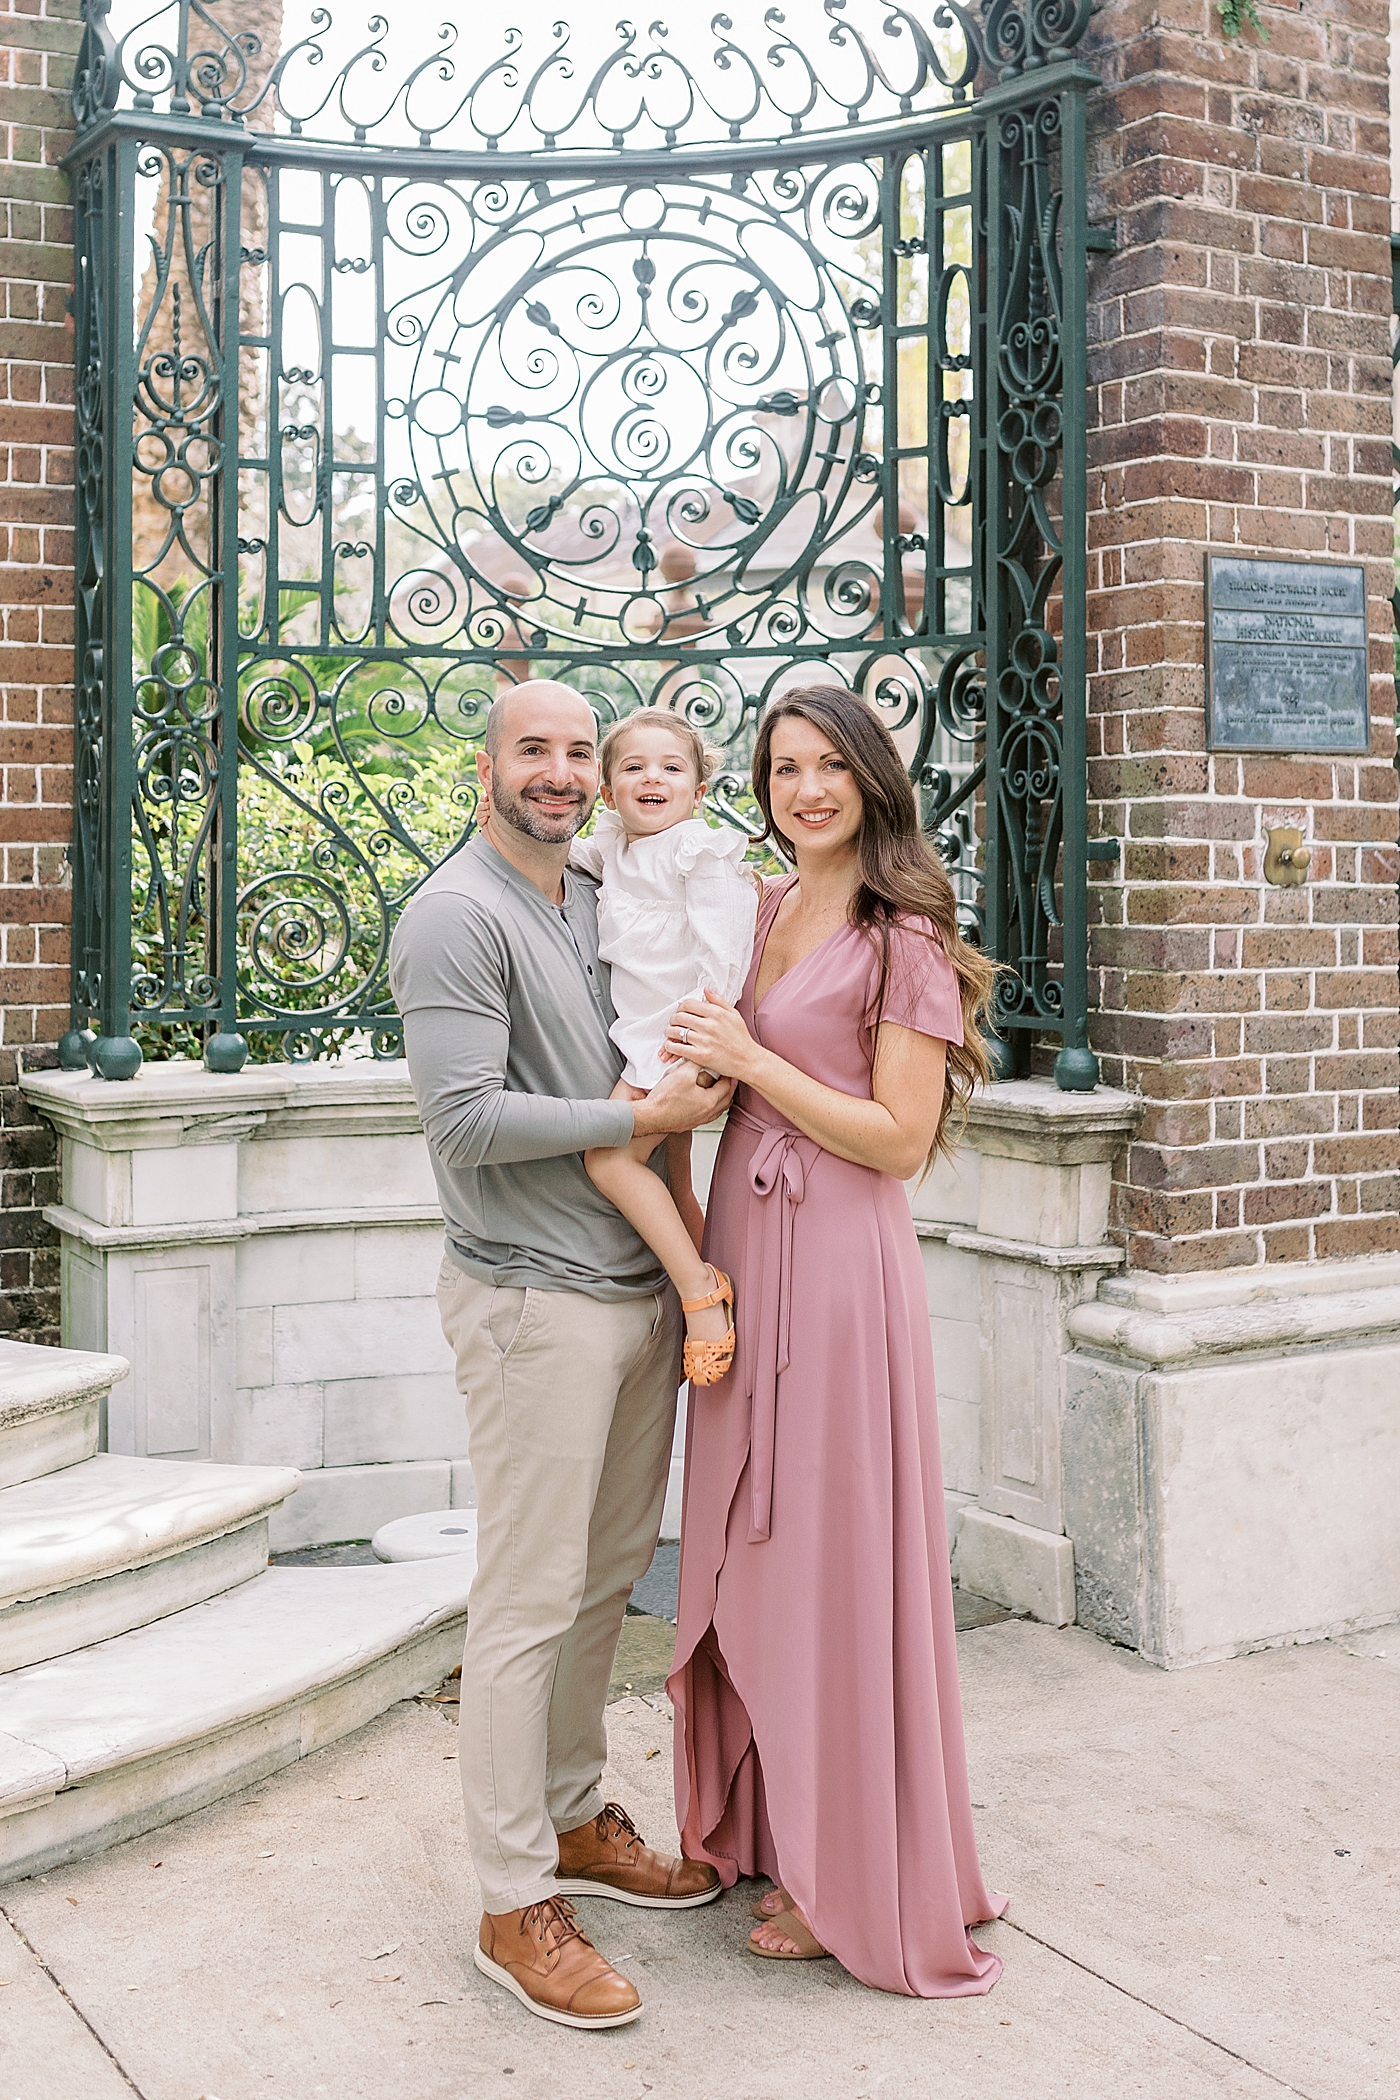 Mom and dad with their toddler girl posing | Photo by Caitlyn Motycka Photography